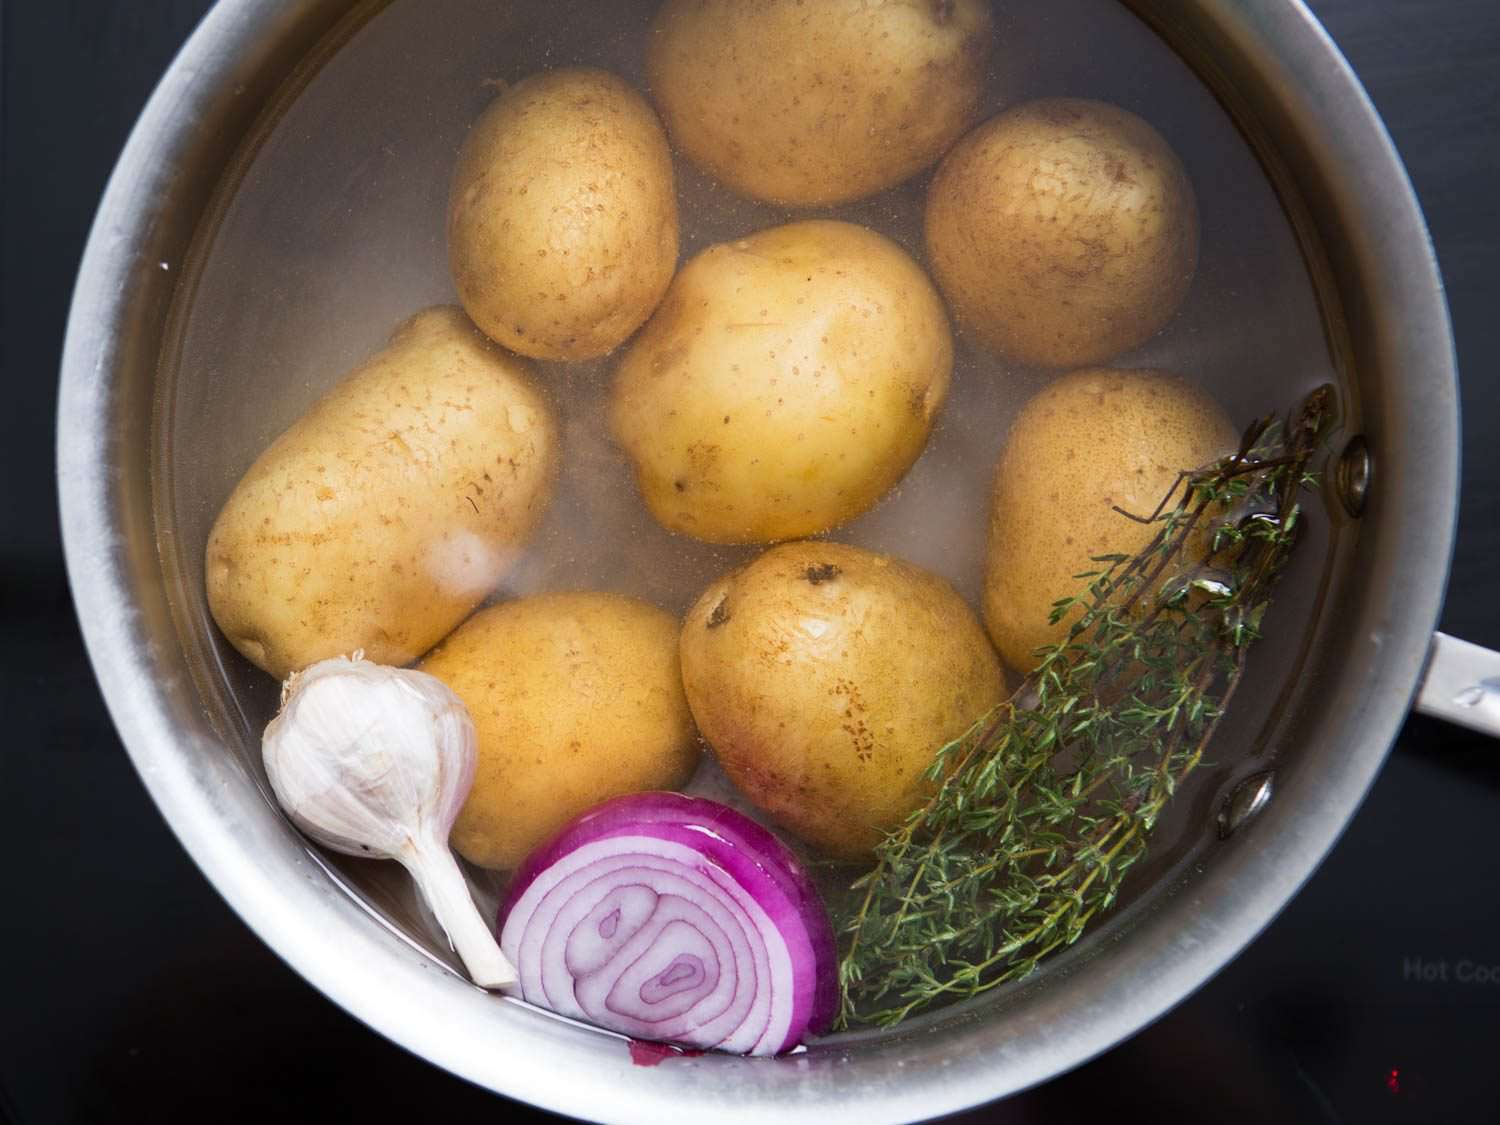 Potatoes in pot of water with garlic, shallot, and rosemary.